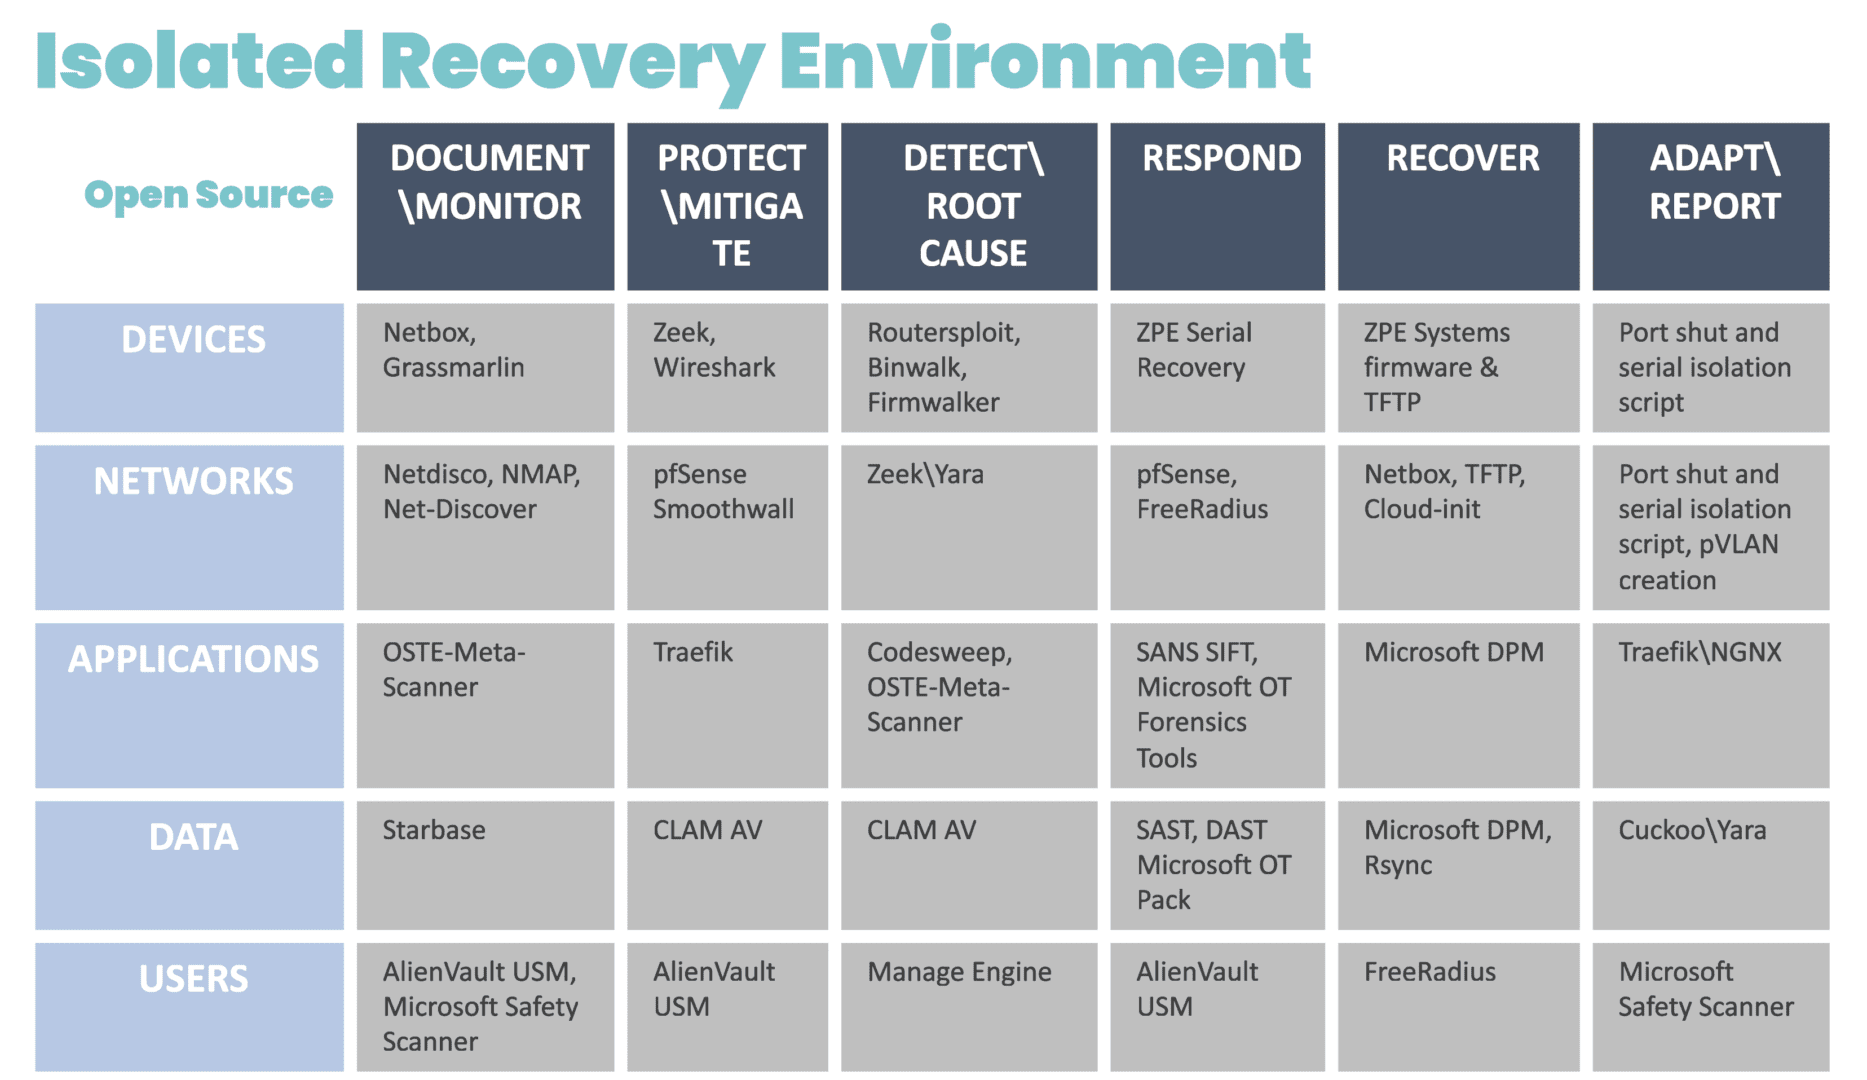 Diagram showing a chart containing the systems and open-source tools that can be deployed for an Isolated Recovery Environment